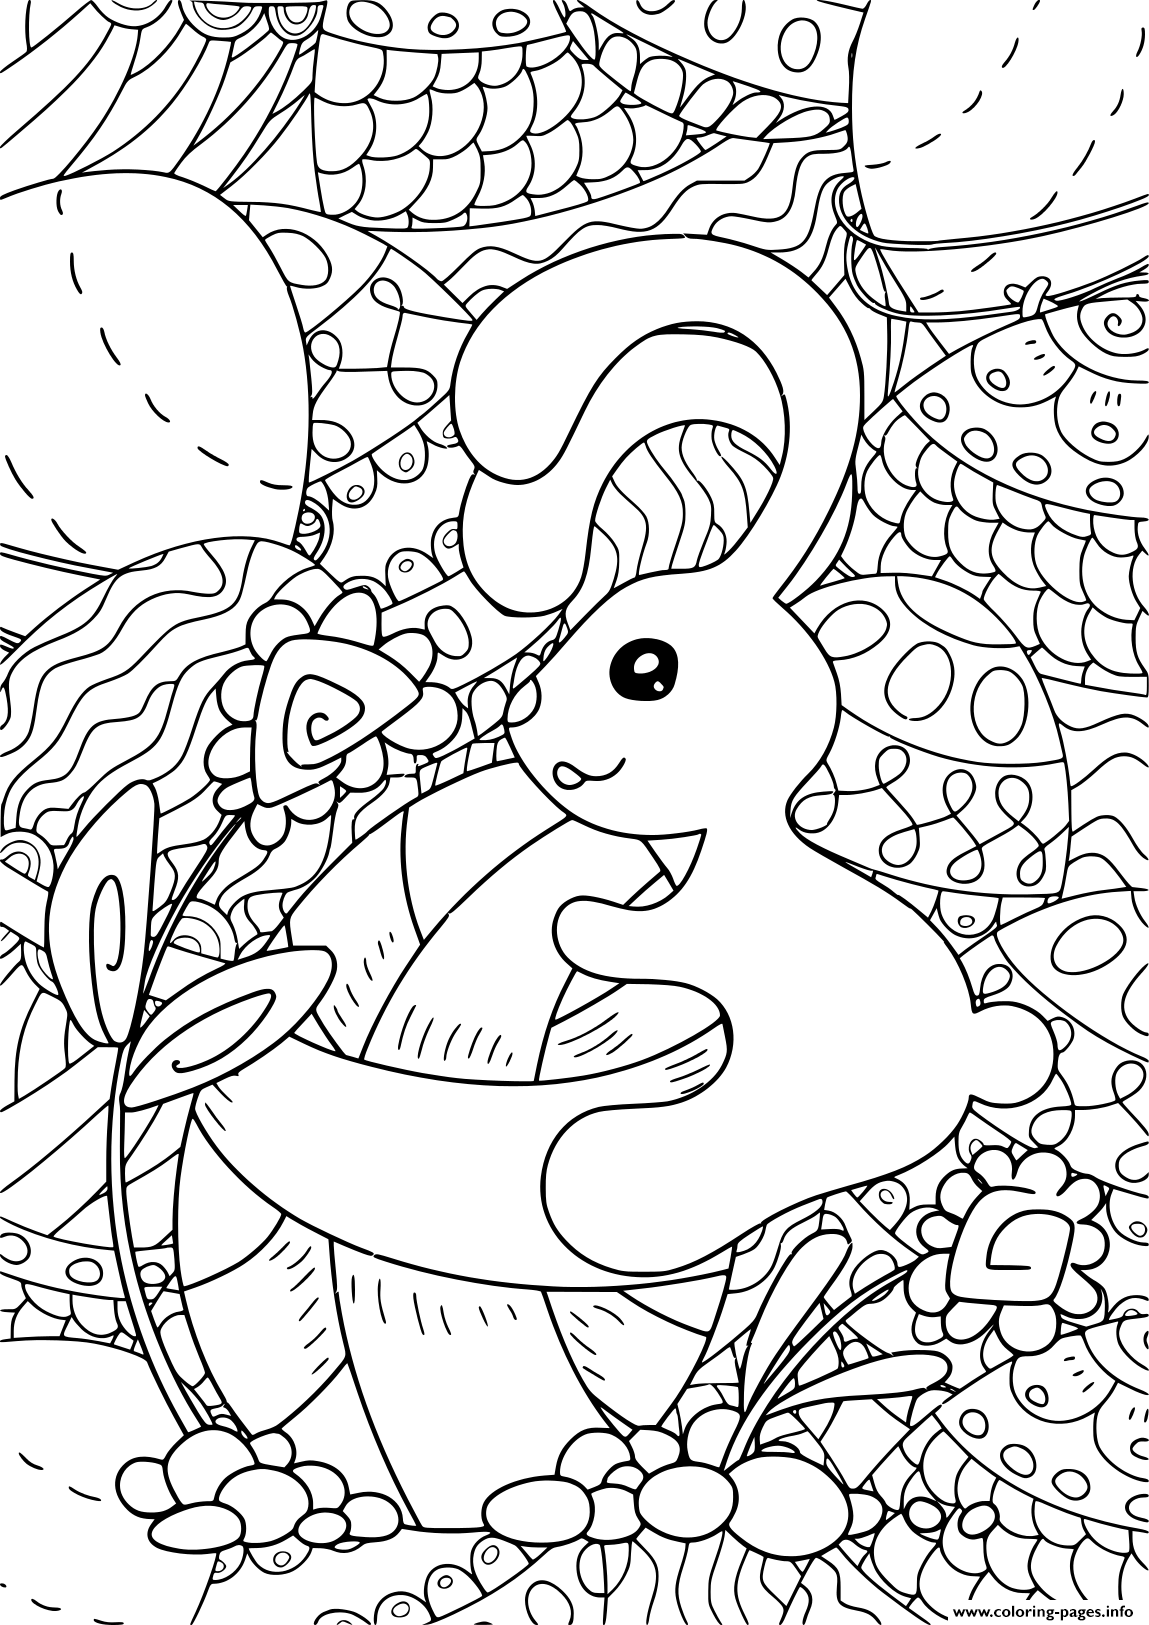 Rabbit Easter For Adult And Children Antistress coloring